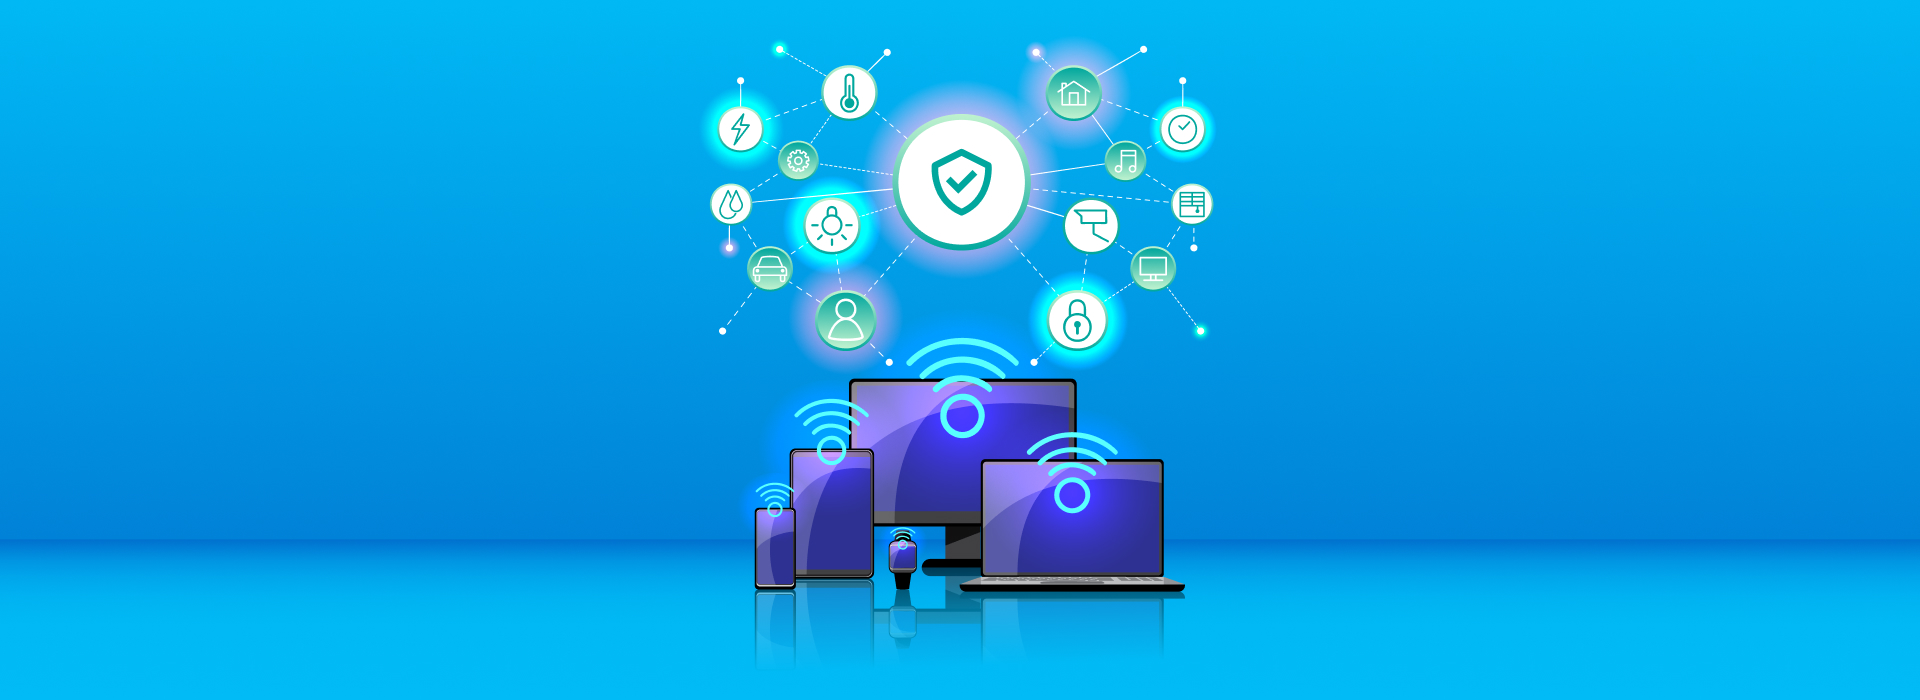 Internet of Things (IoT) Security Challenges and Best Practices